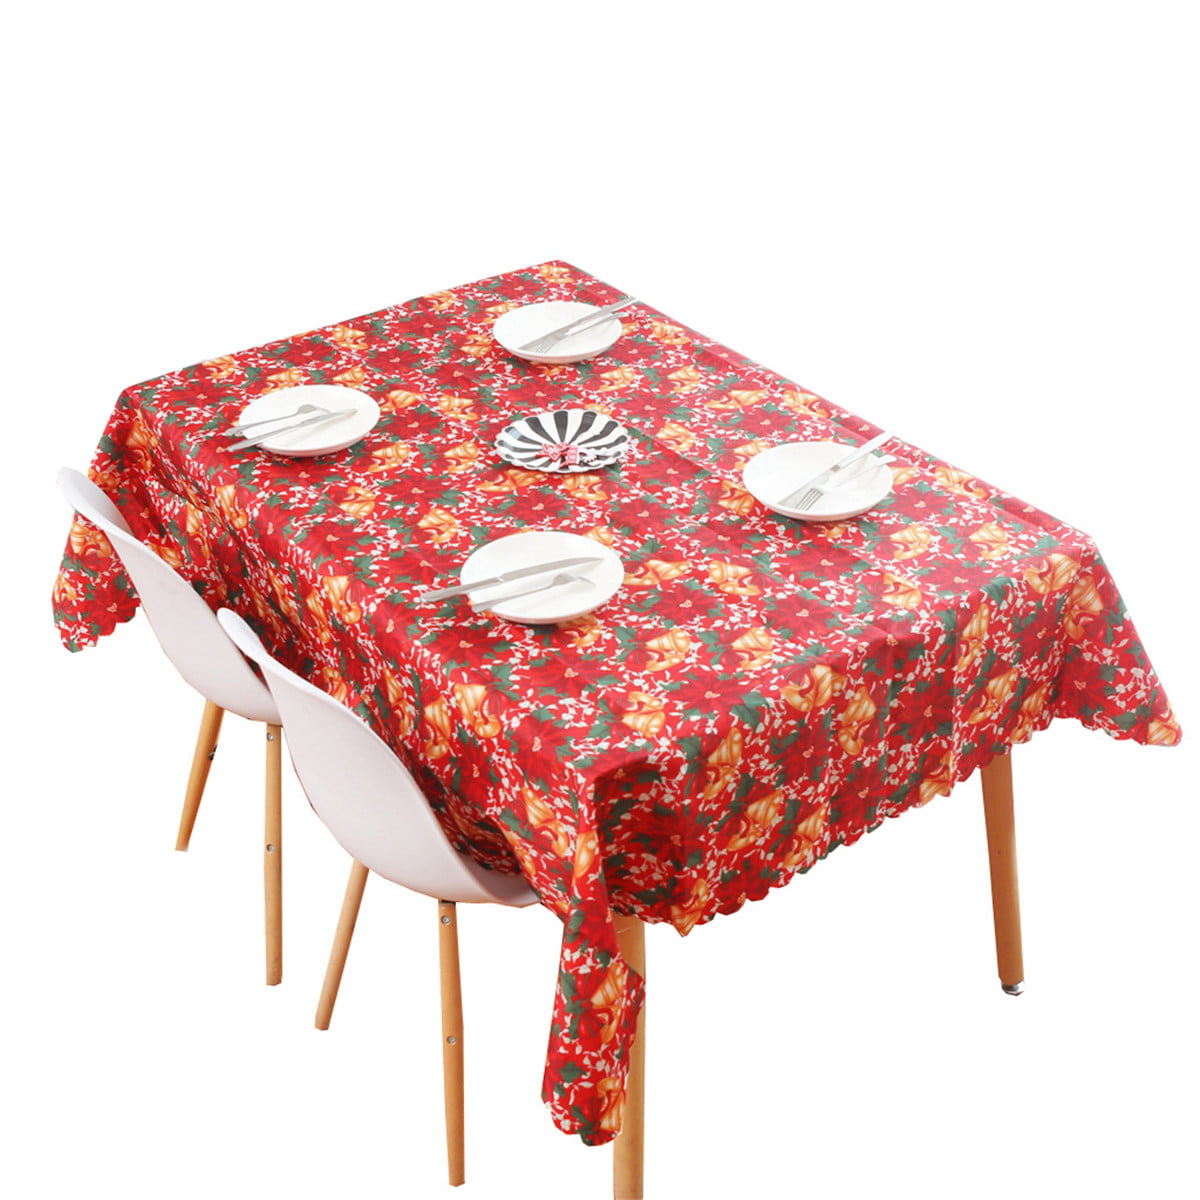 Rectangle Printed Tablecloth Winter Christmas Holly Berries Table Cloth Stain Resistant Table Cover for Kitchen Tabletop,60 x 60